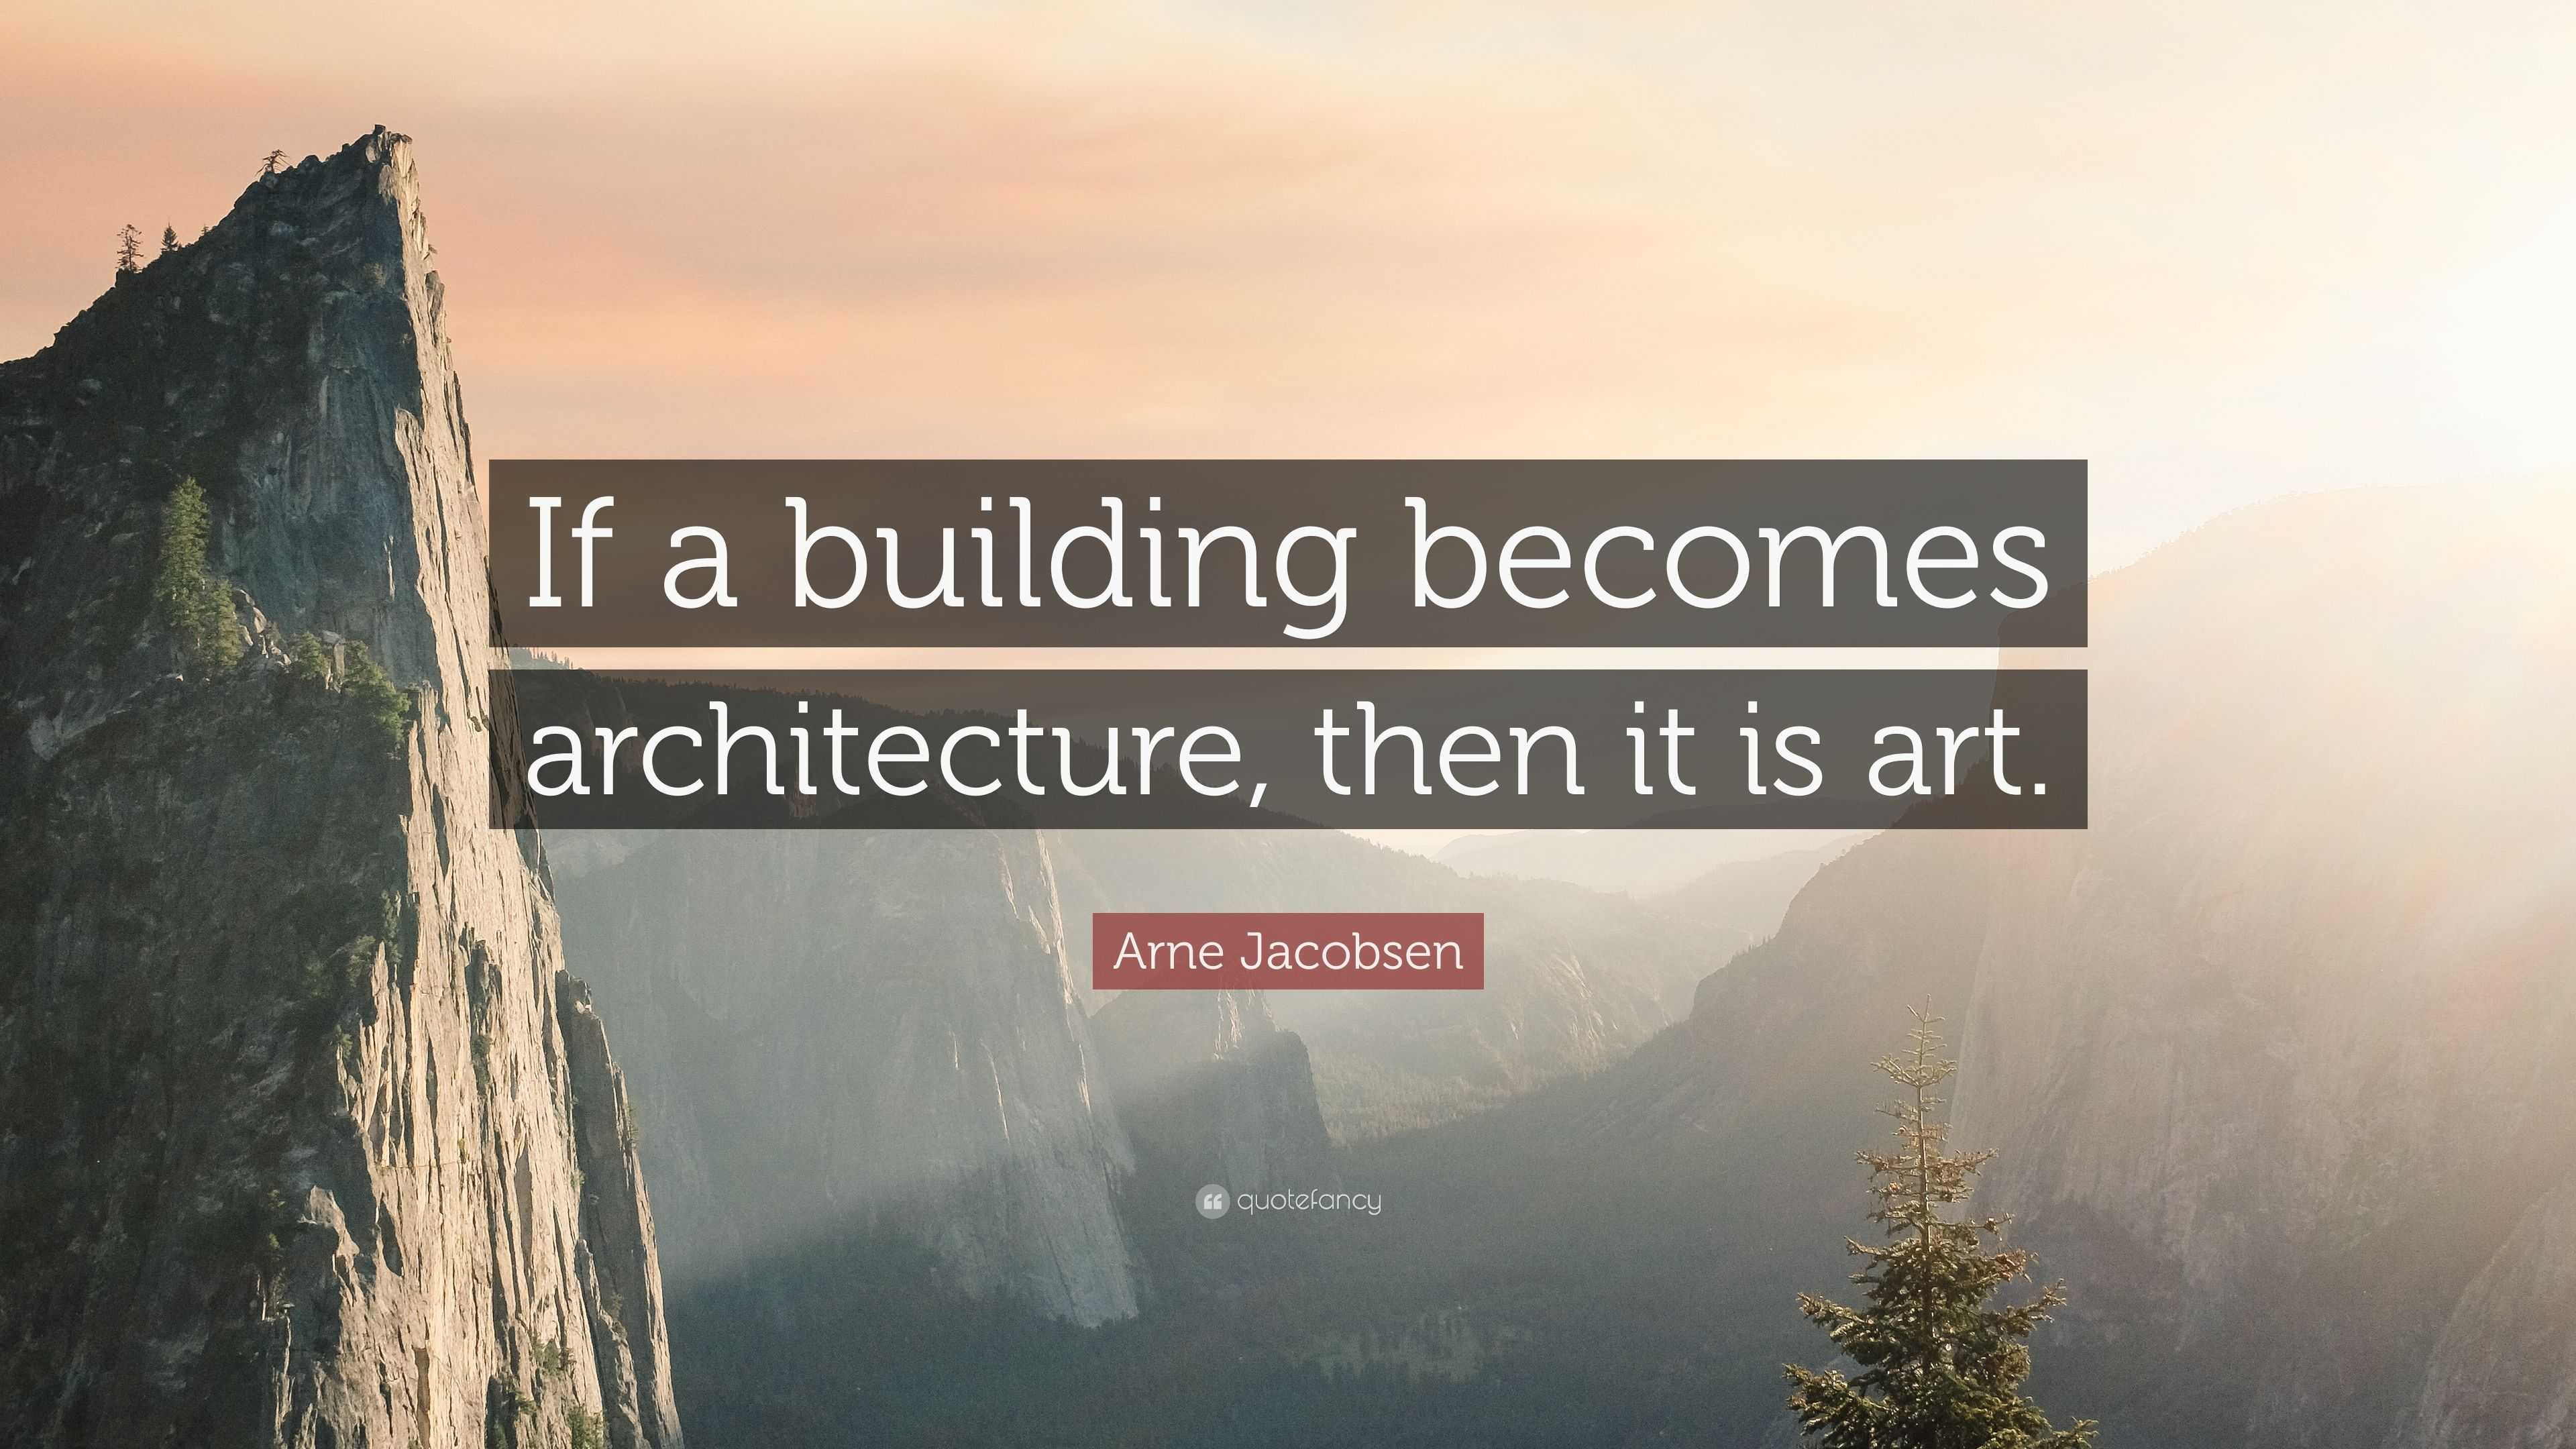 Arne Jacobsen Quote: “If a building becomes architecture, then it is art.”